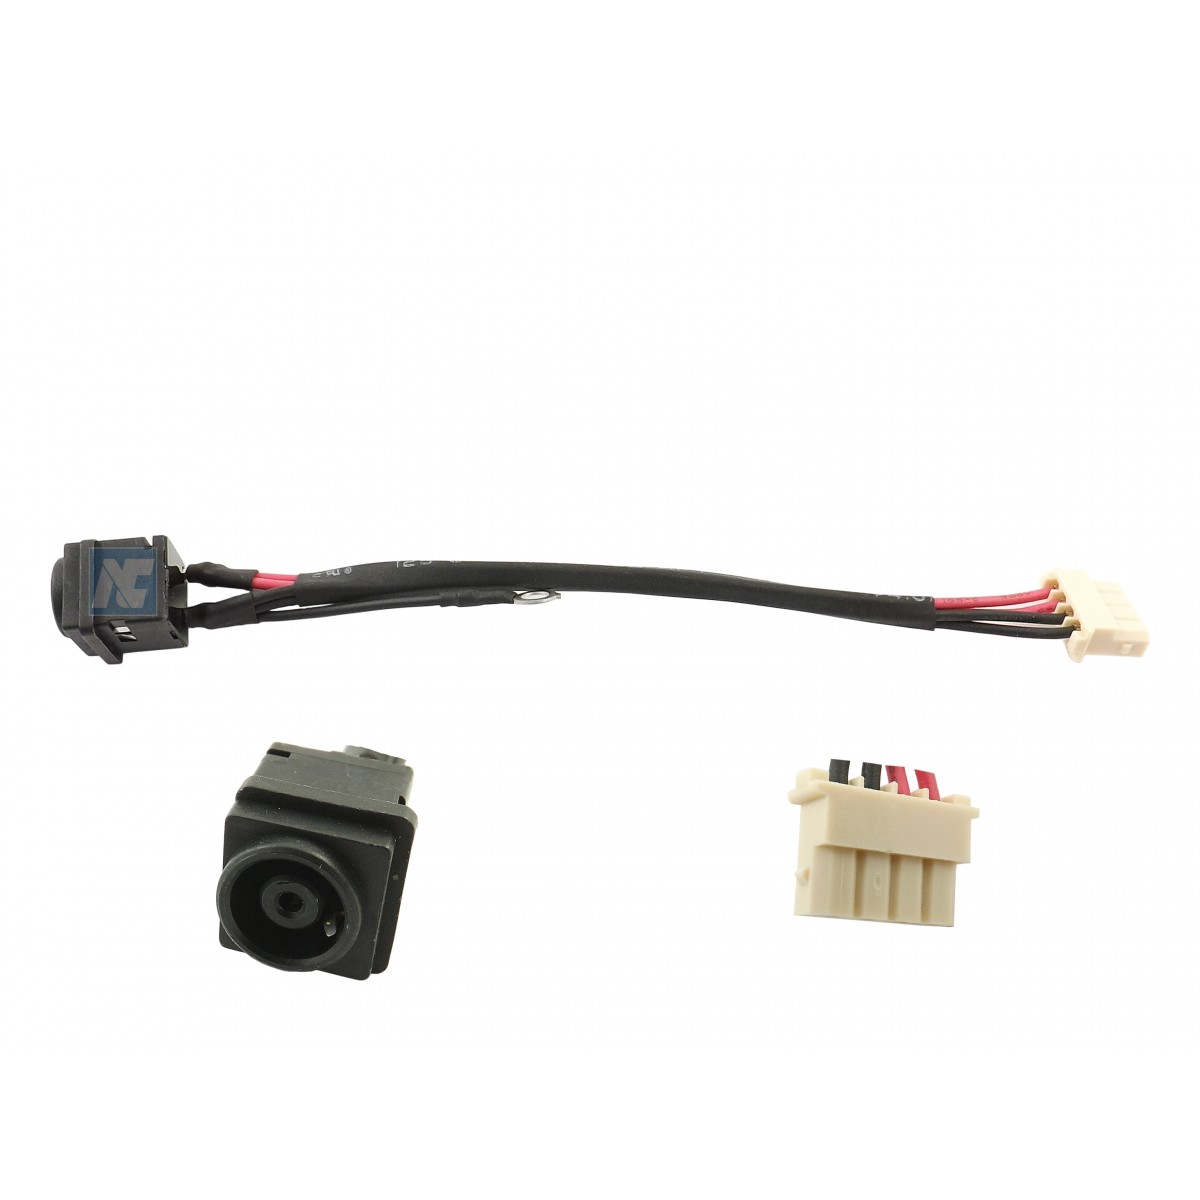 1cm, 4-wire 4-pin connector New DC Jack Power Harness Plug IN For Sony Vaio PCG-71711L PCG-71811L PCG-71811M PCG-71811W PCG-71911L PCG-71911M PCG-71912L PCG-71912M PCG-71913L PCG-71914L VPCEH25FM V 